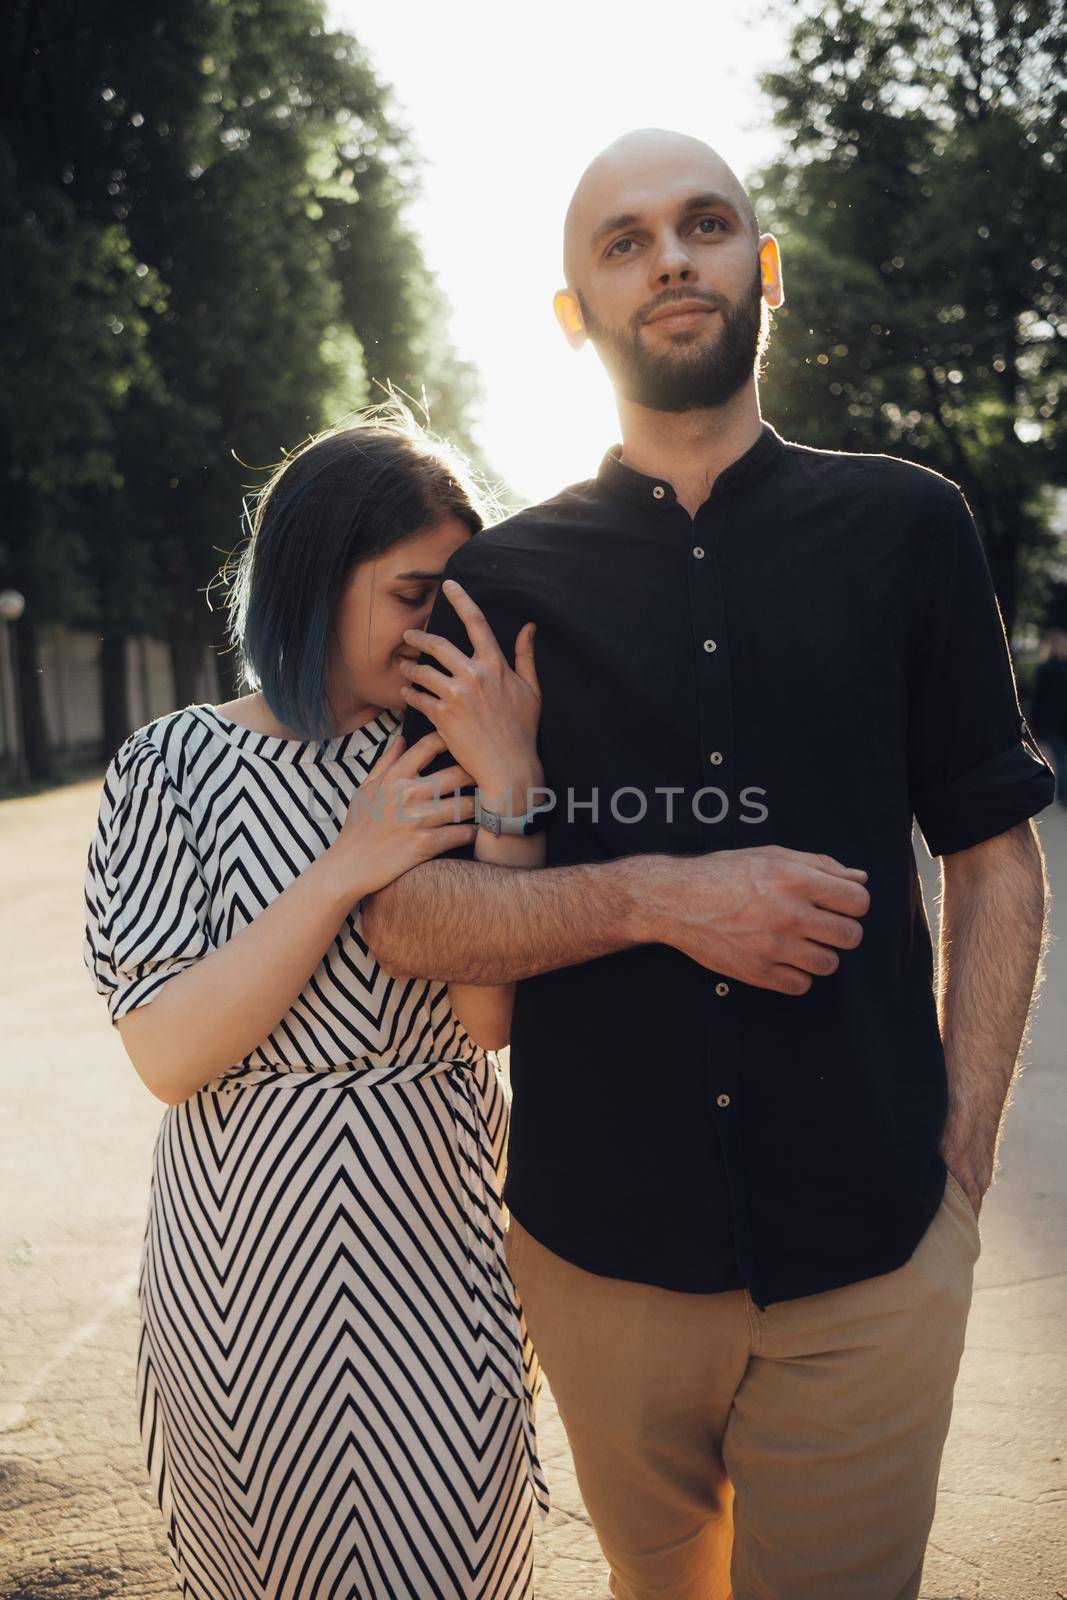 lovers take a walk in the park in the summer. the girl firmly holds the guy's hand by Symonenko